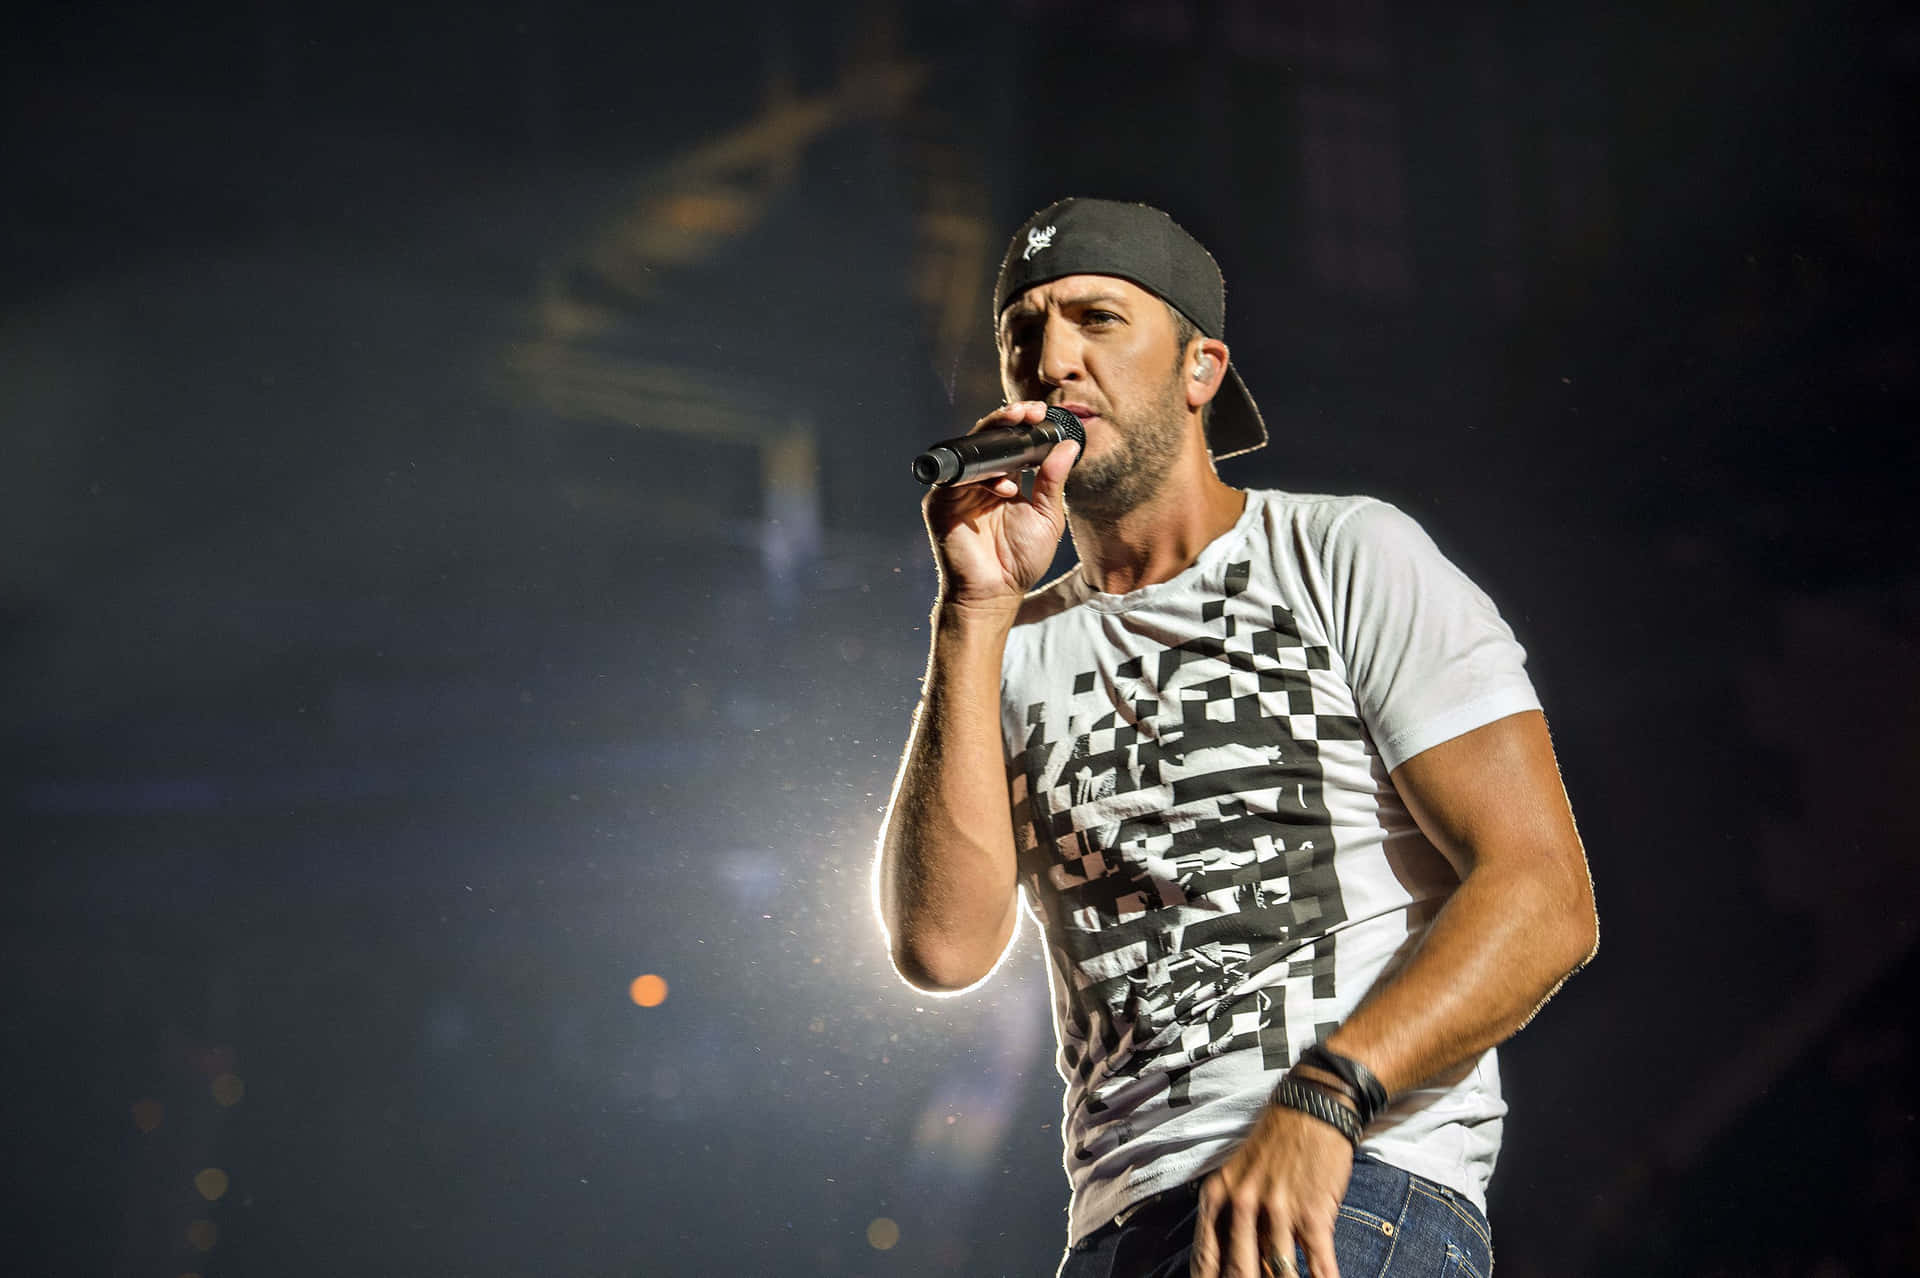 Luke Bryan brings the party to life with his music Wallpaper